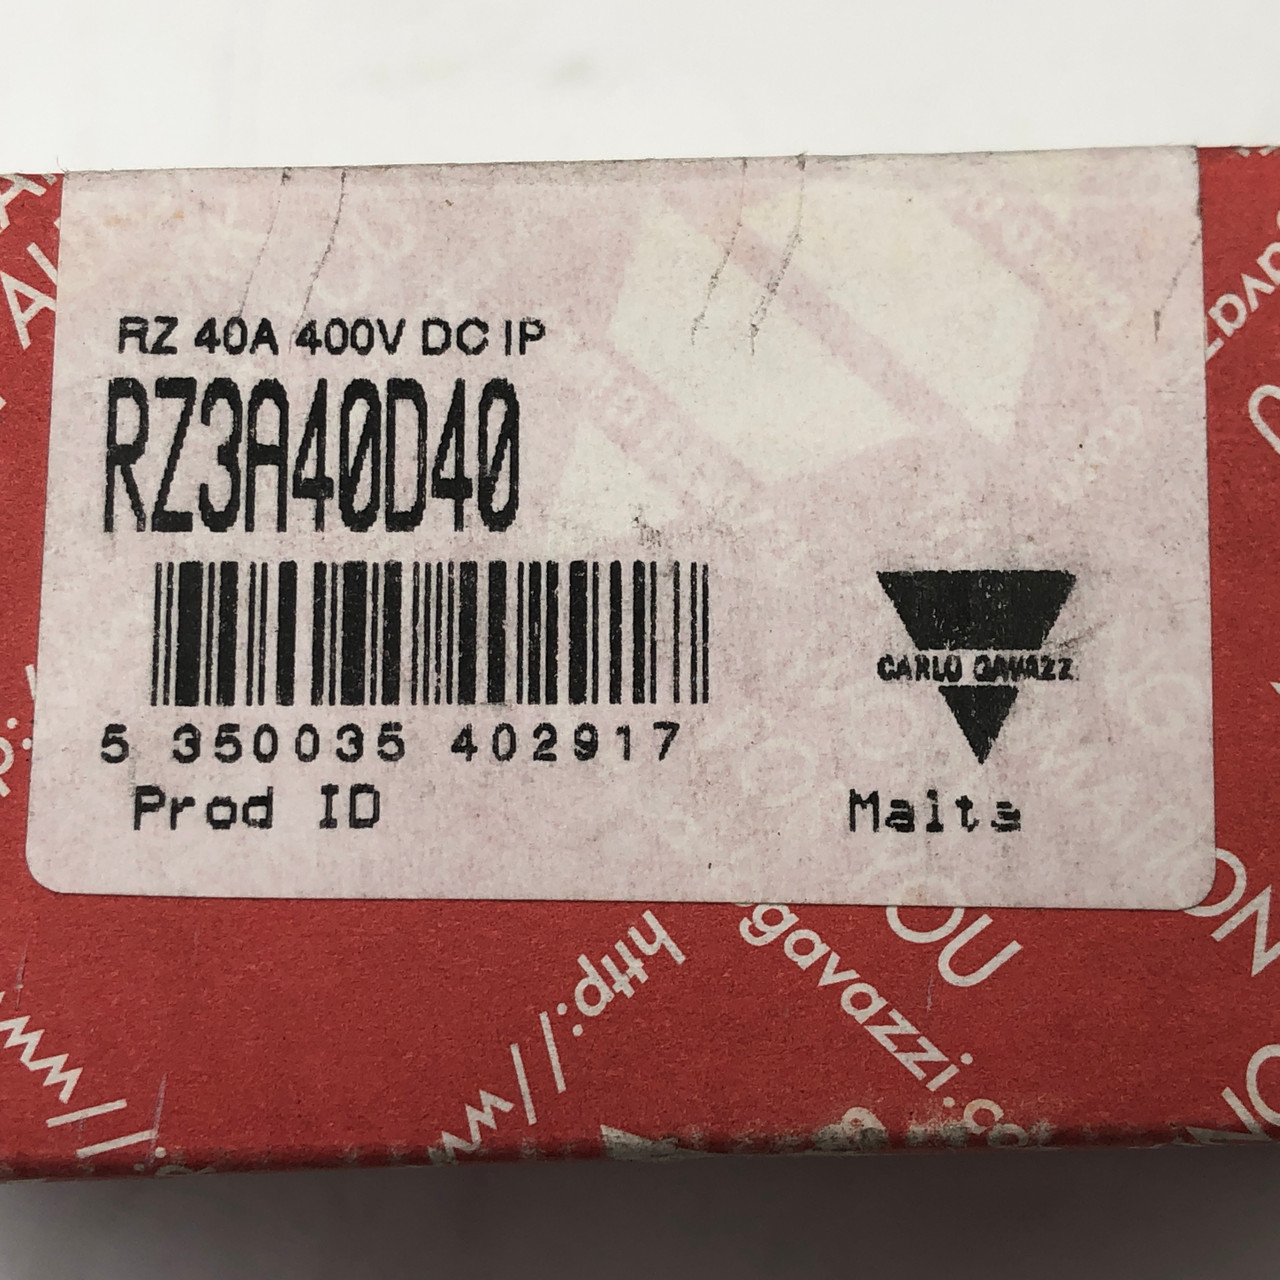 CARLO GAVAZZI RZ3A40D40 240V 40A SOLID STATE RELAY - NEW